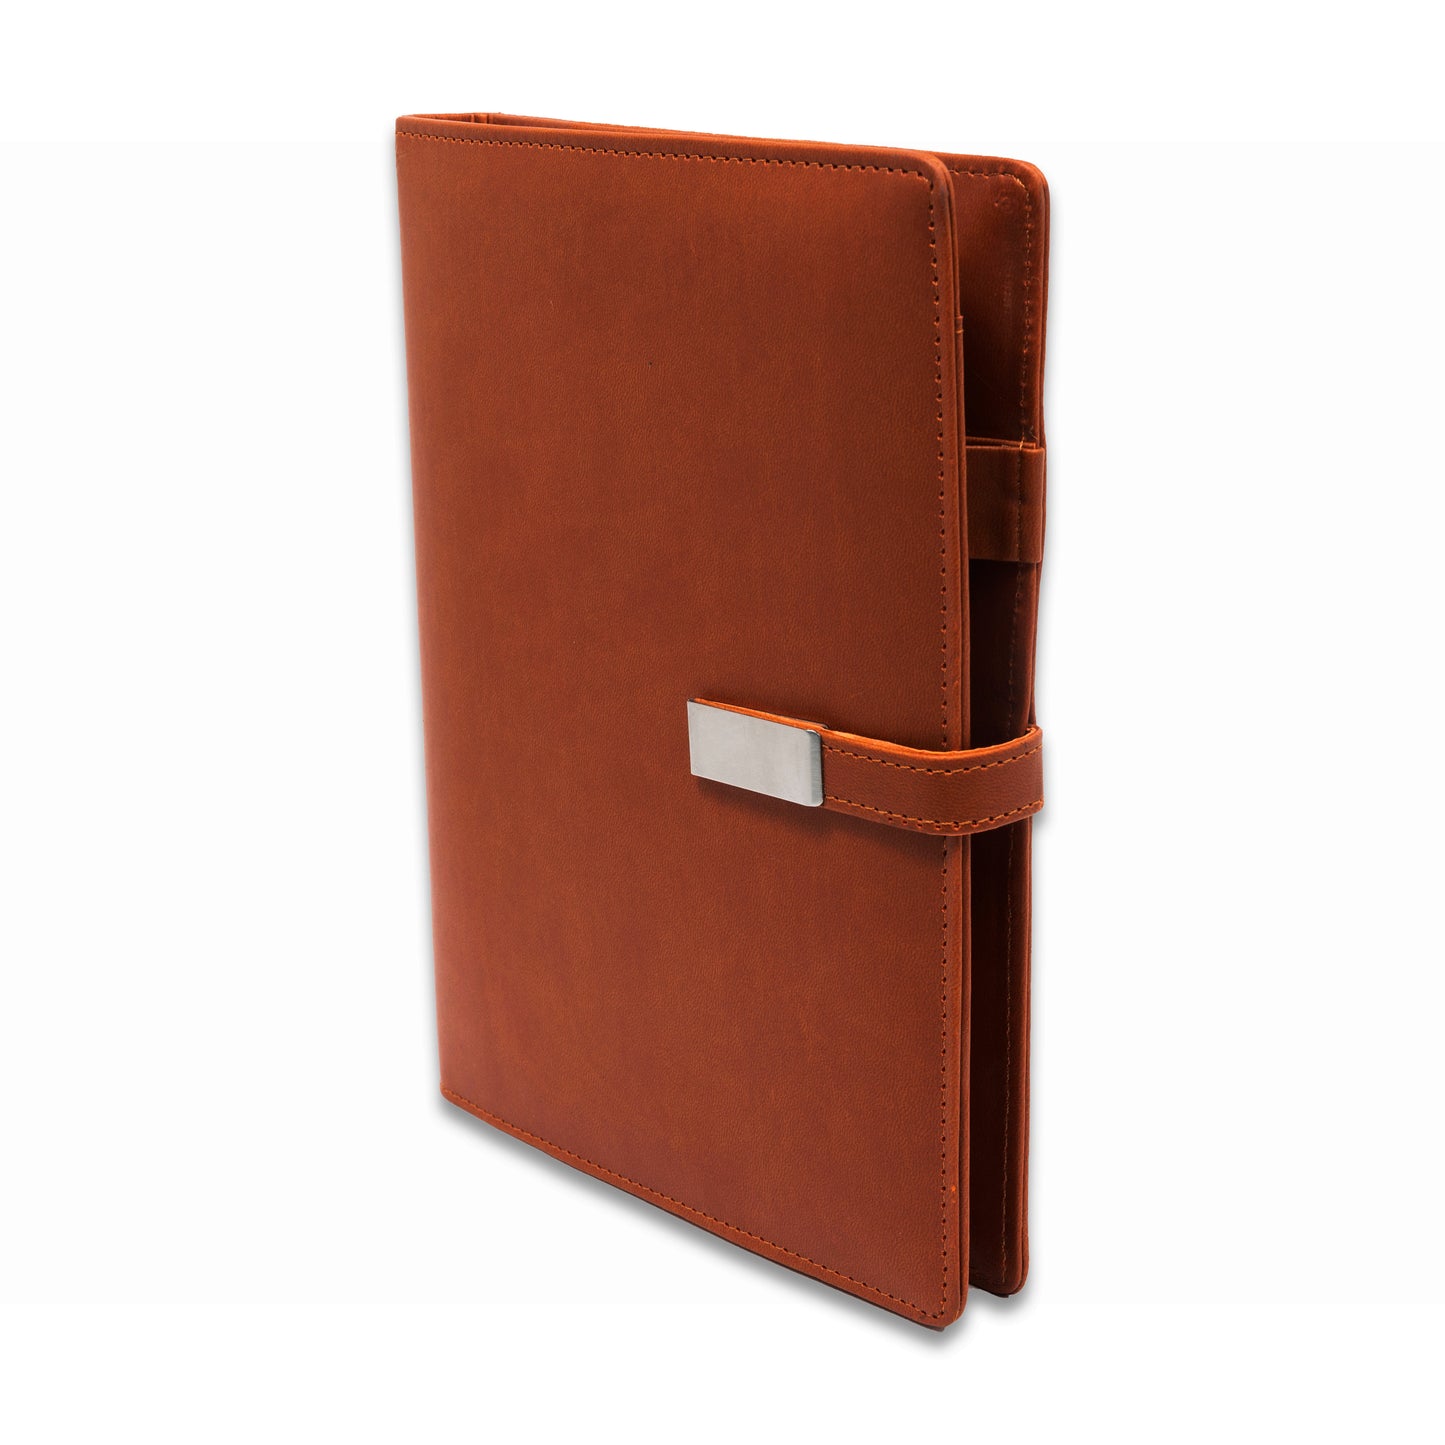 Personalized Brown Notebook Diary Power bank - For Office Use, Personal Use, Return Gift, or Corporate Gifting - DPBxxx5000mAh HK5000